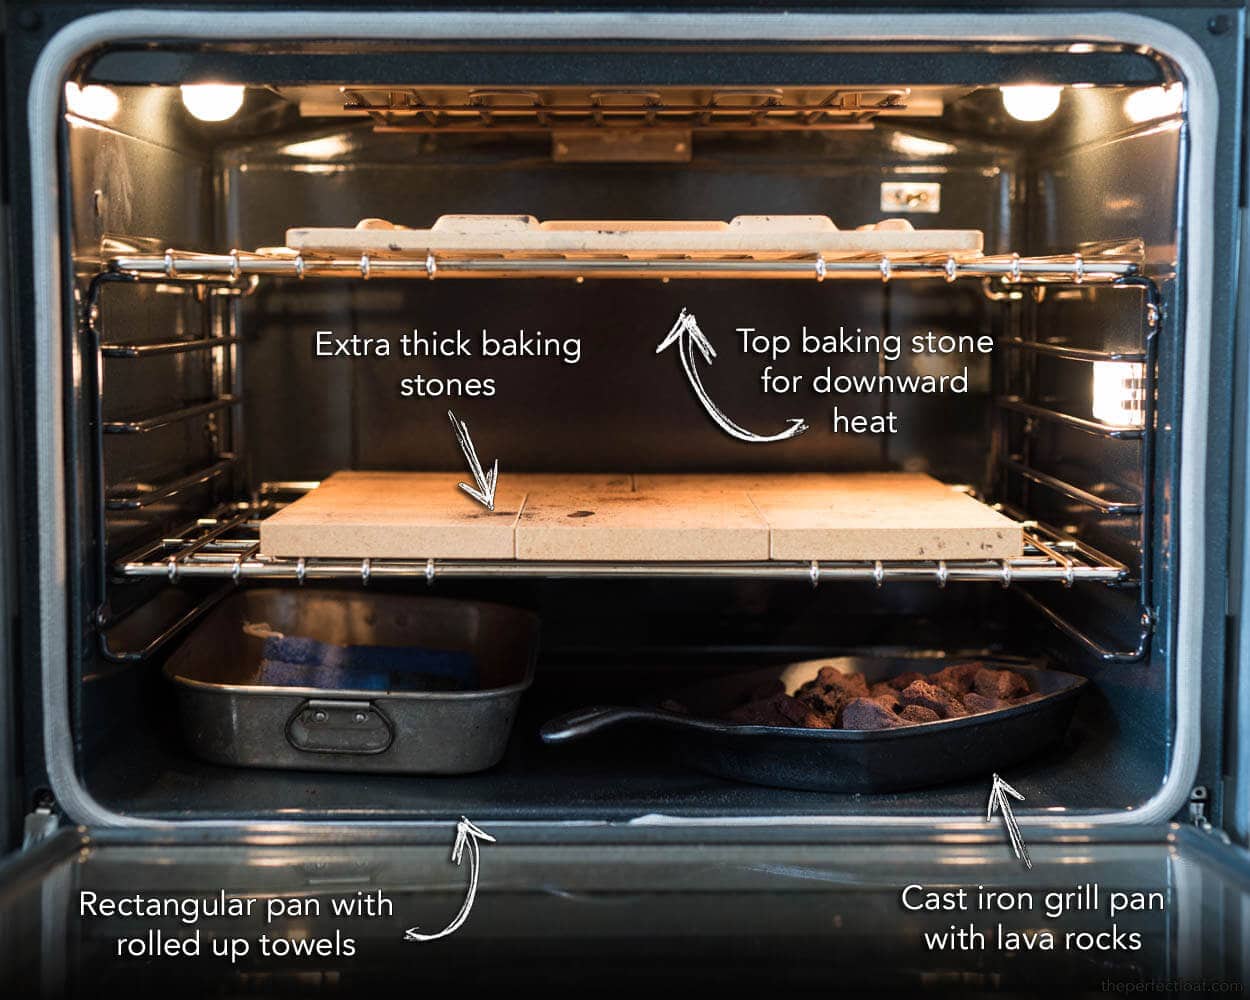 How to Choose the Best Oven Rack Position When Baking